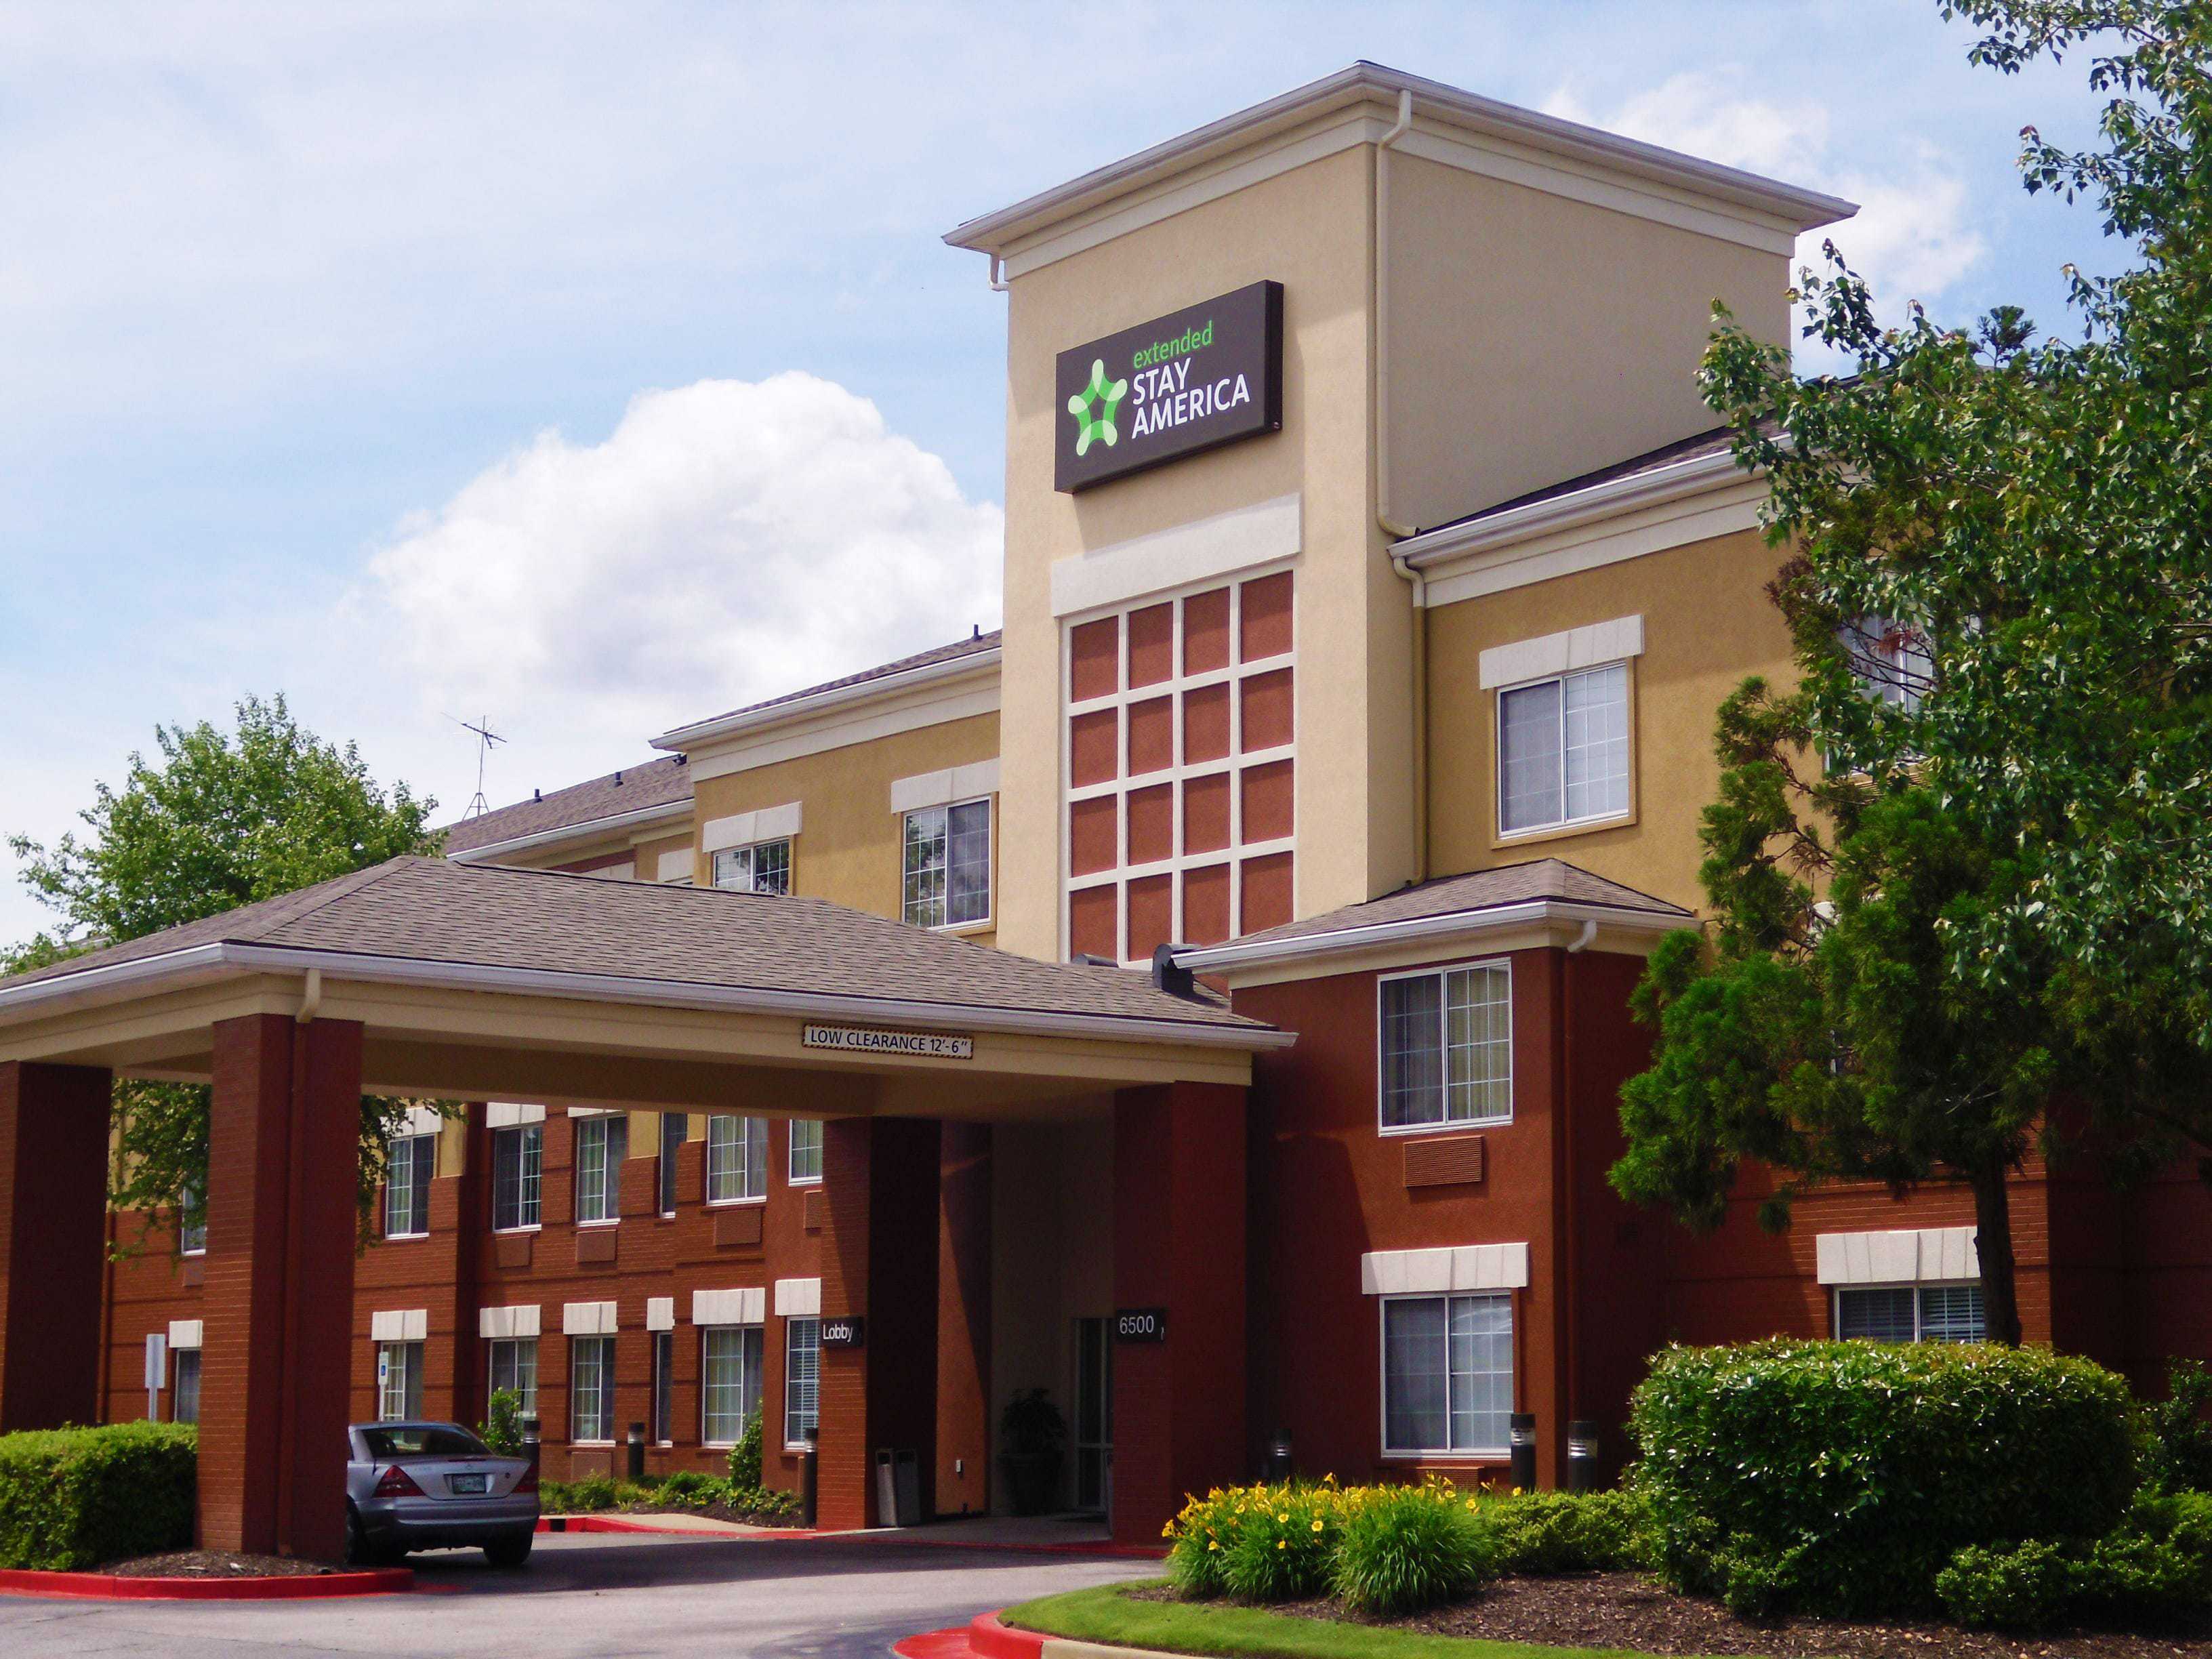 Photo of Extended Stay America - Memphis - Germantown, Memphis, TN